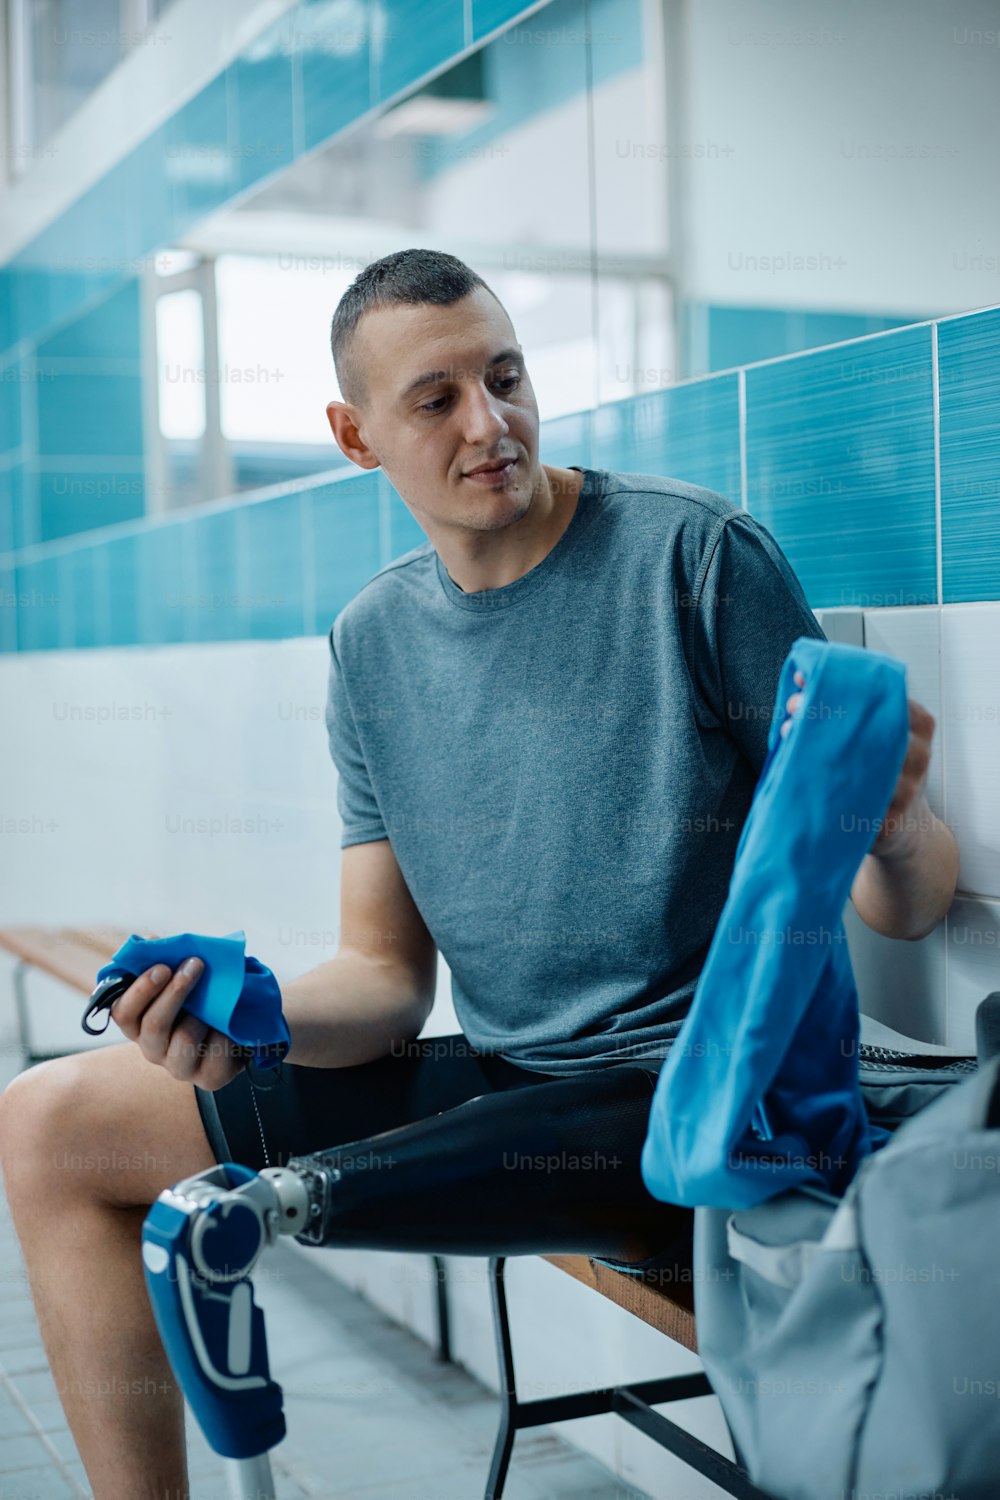 Young athlete with a leg prosthetic getting ready for swimming training in dressing room.